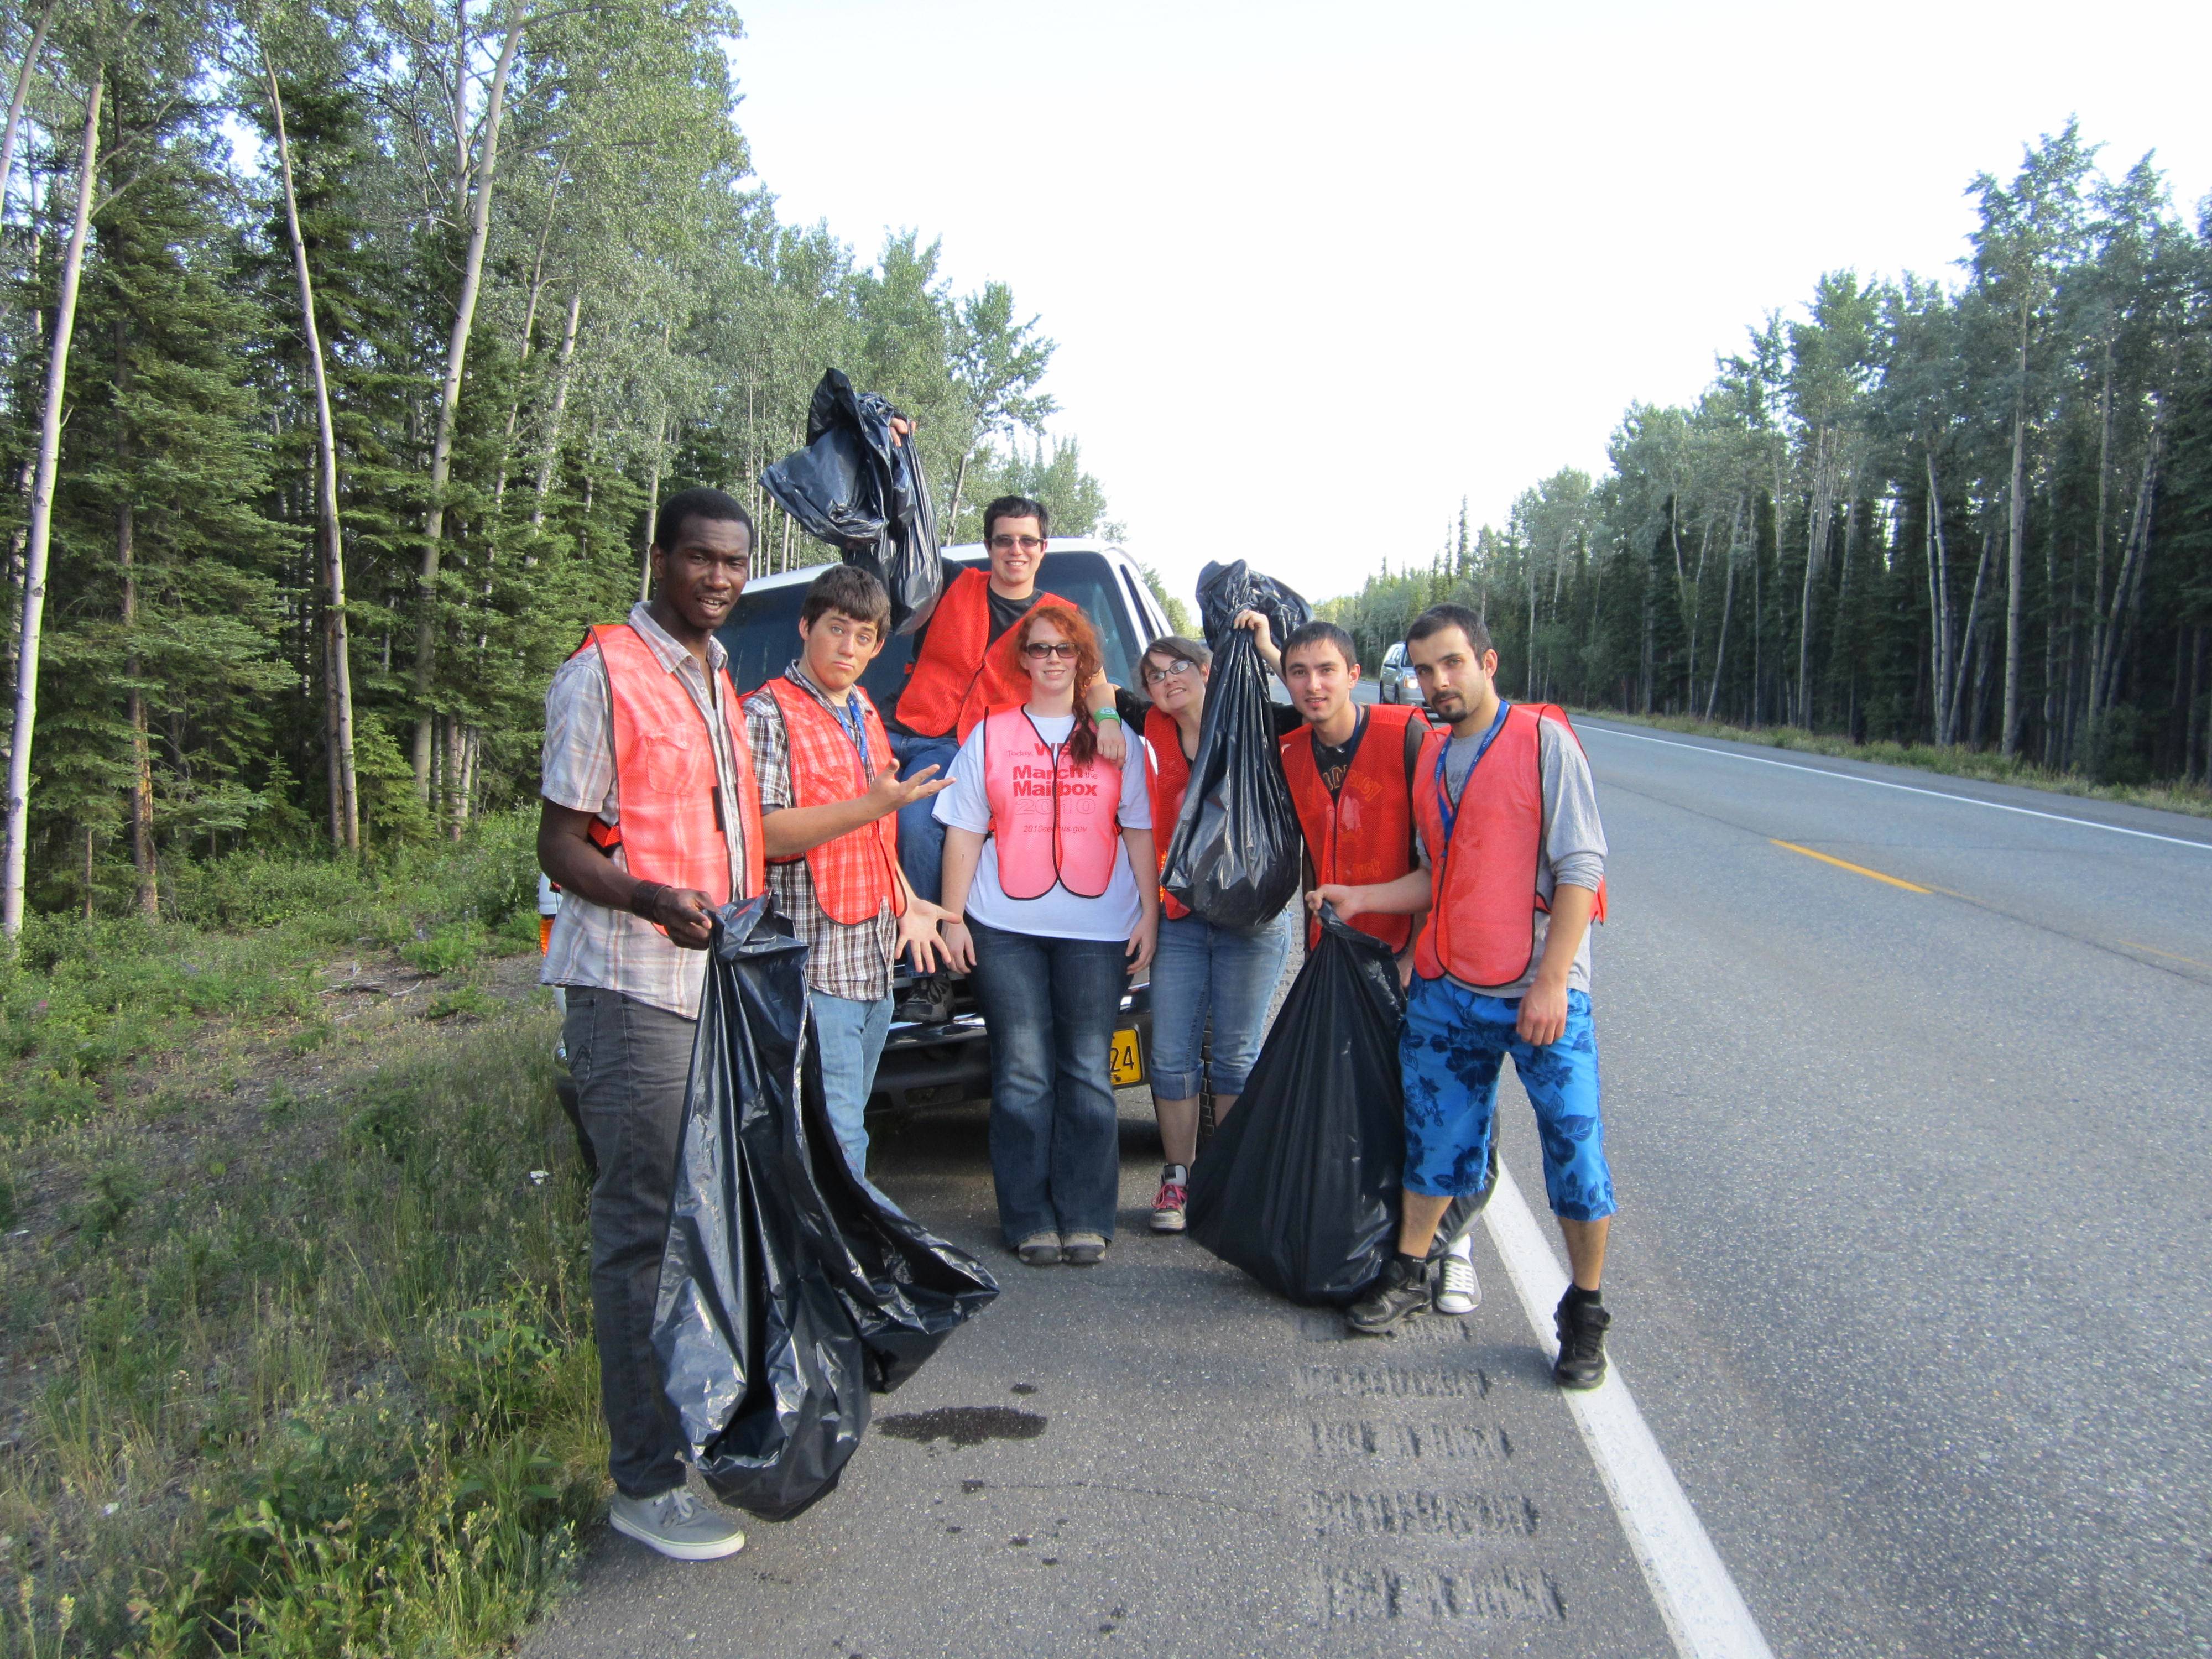 Princess Lodges employees wearing orange vests pose for a photo on the shoulder of the highway